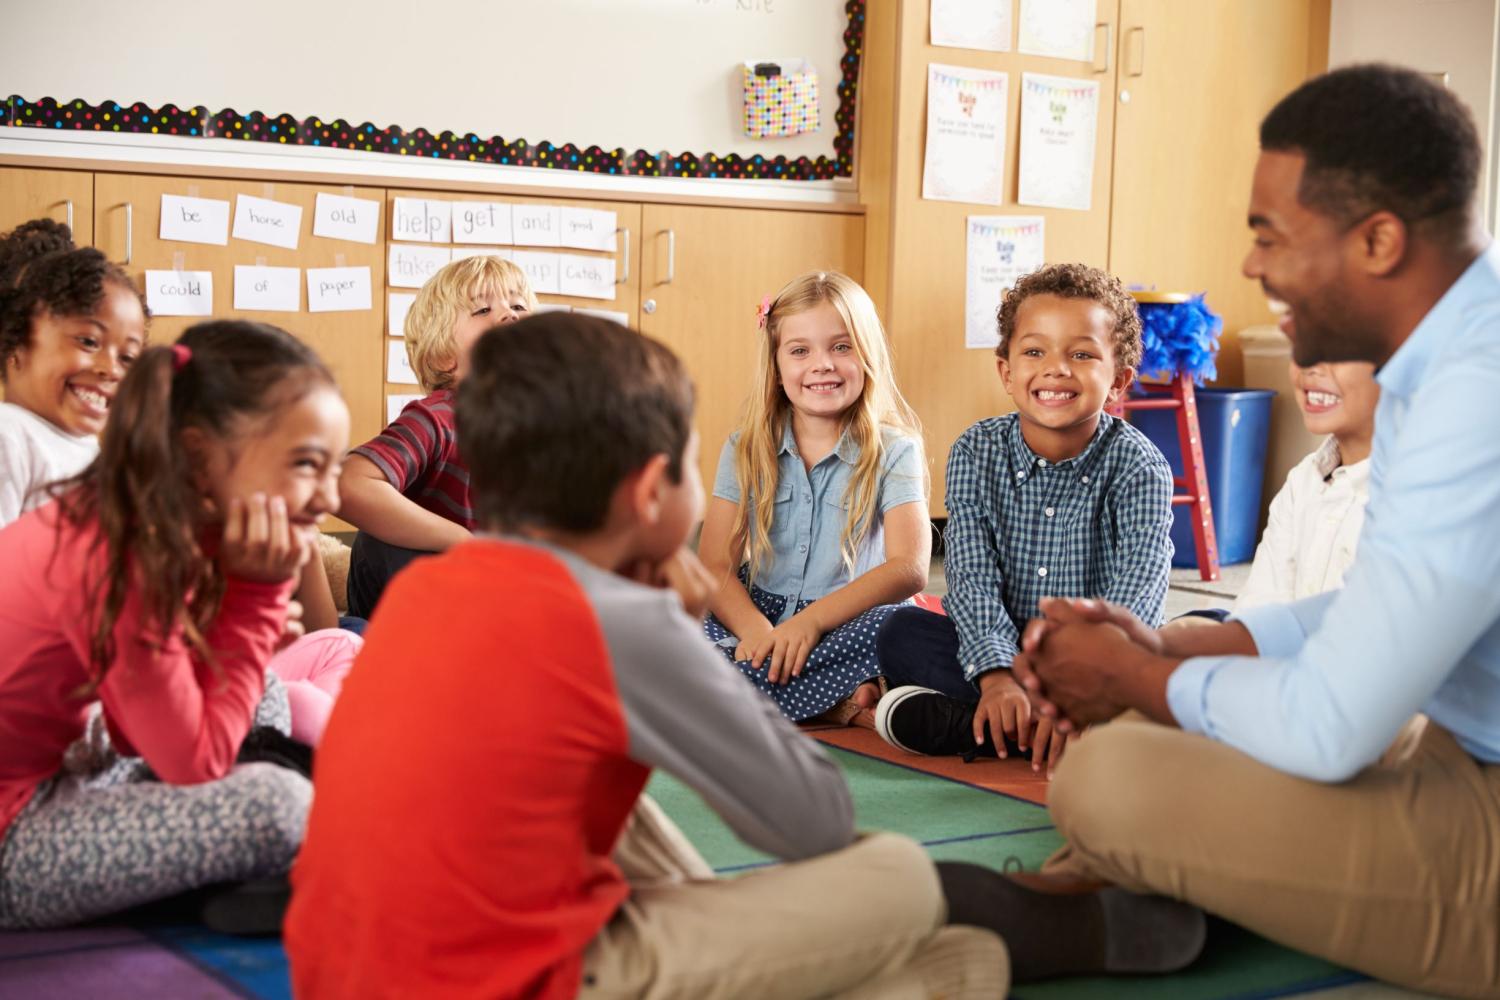 Children sit cross-legged learning together in a classroom.